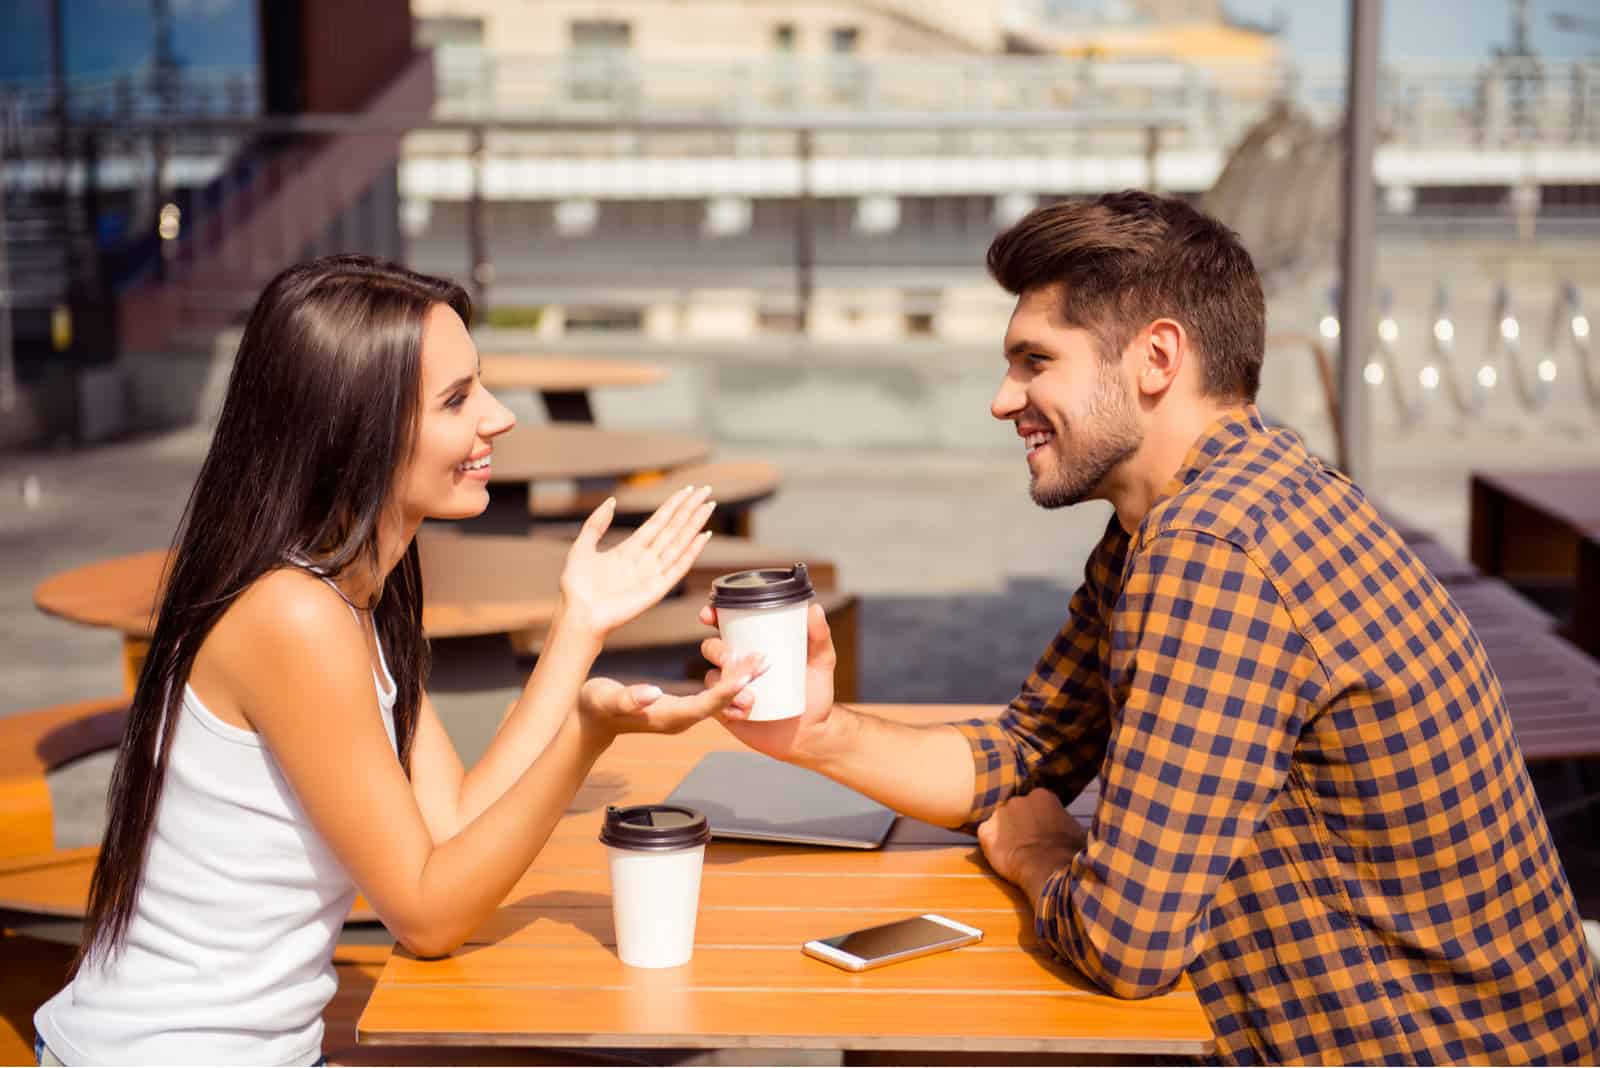 A couple engaged in conversation at a cafe, discussing topics with a backdrop of cozy ambiance